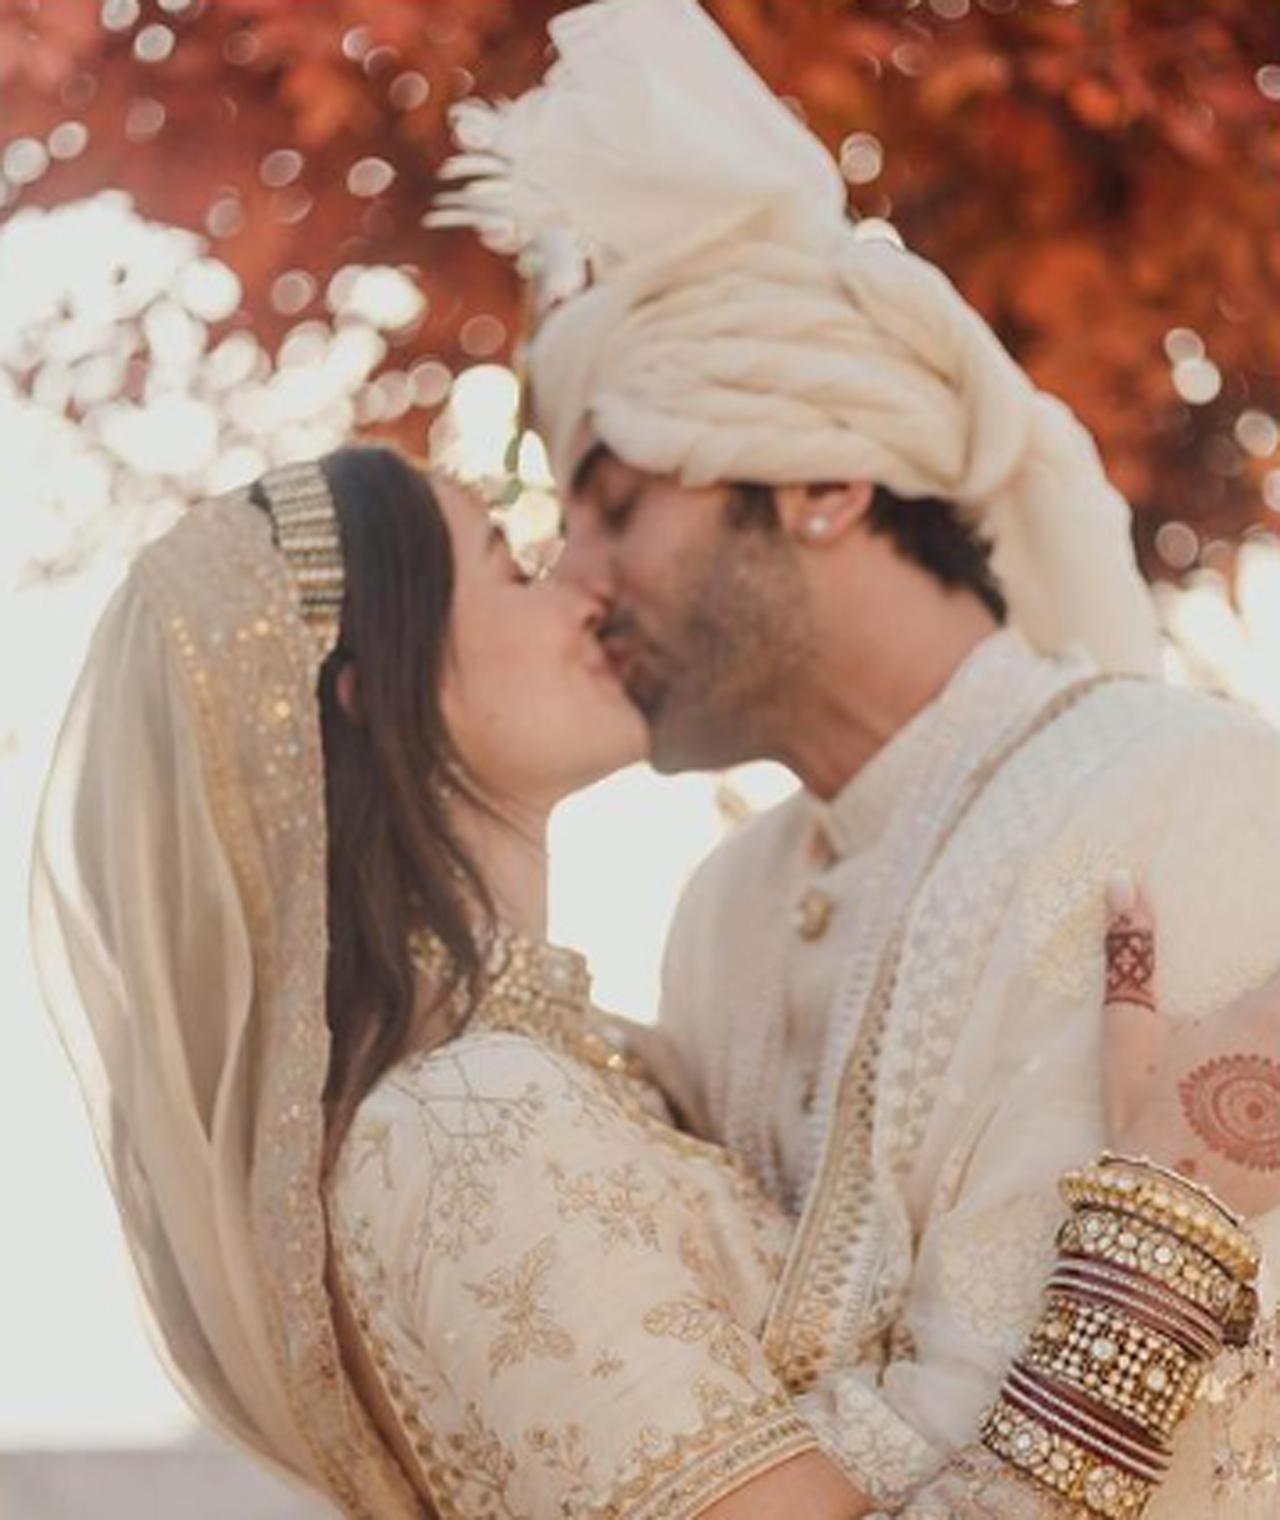 Ranbir Kapoor and Alia Bhatt finally tied the knot on April 14 at the former's residence 'Vastu' at Pali Hill, Bandra. Alia shared the wedding pictures soon after and fashion designer Sabyasachi Mukherjee has now decoded the couple's wedding outfits.